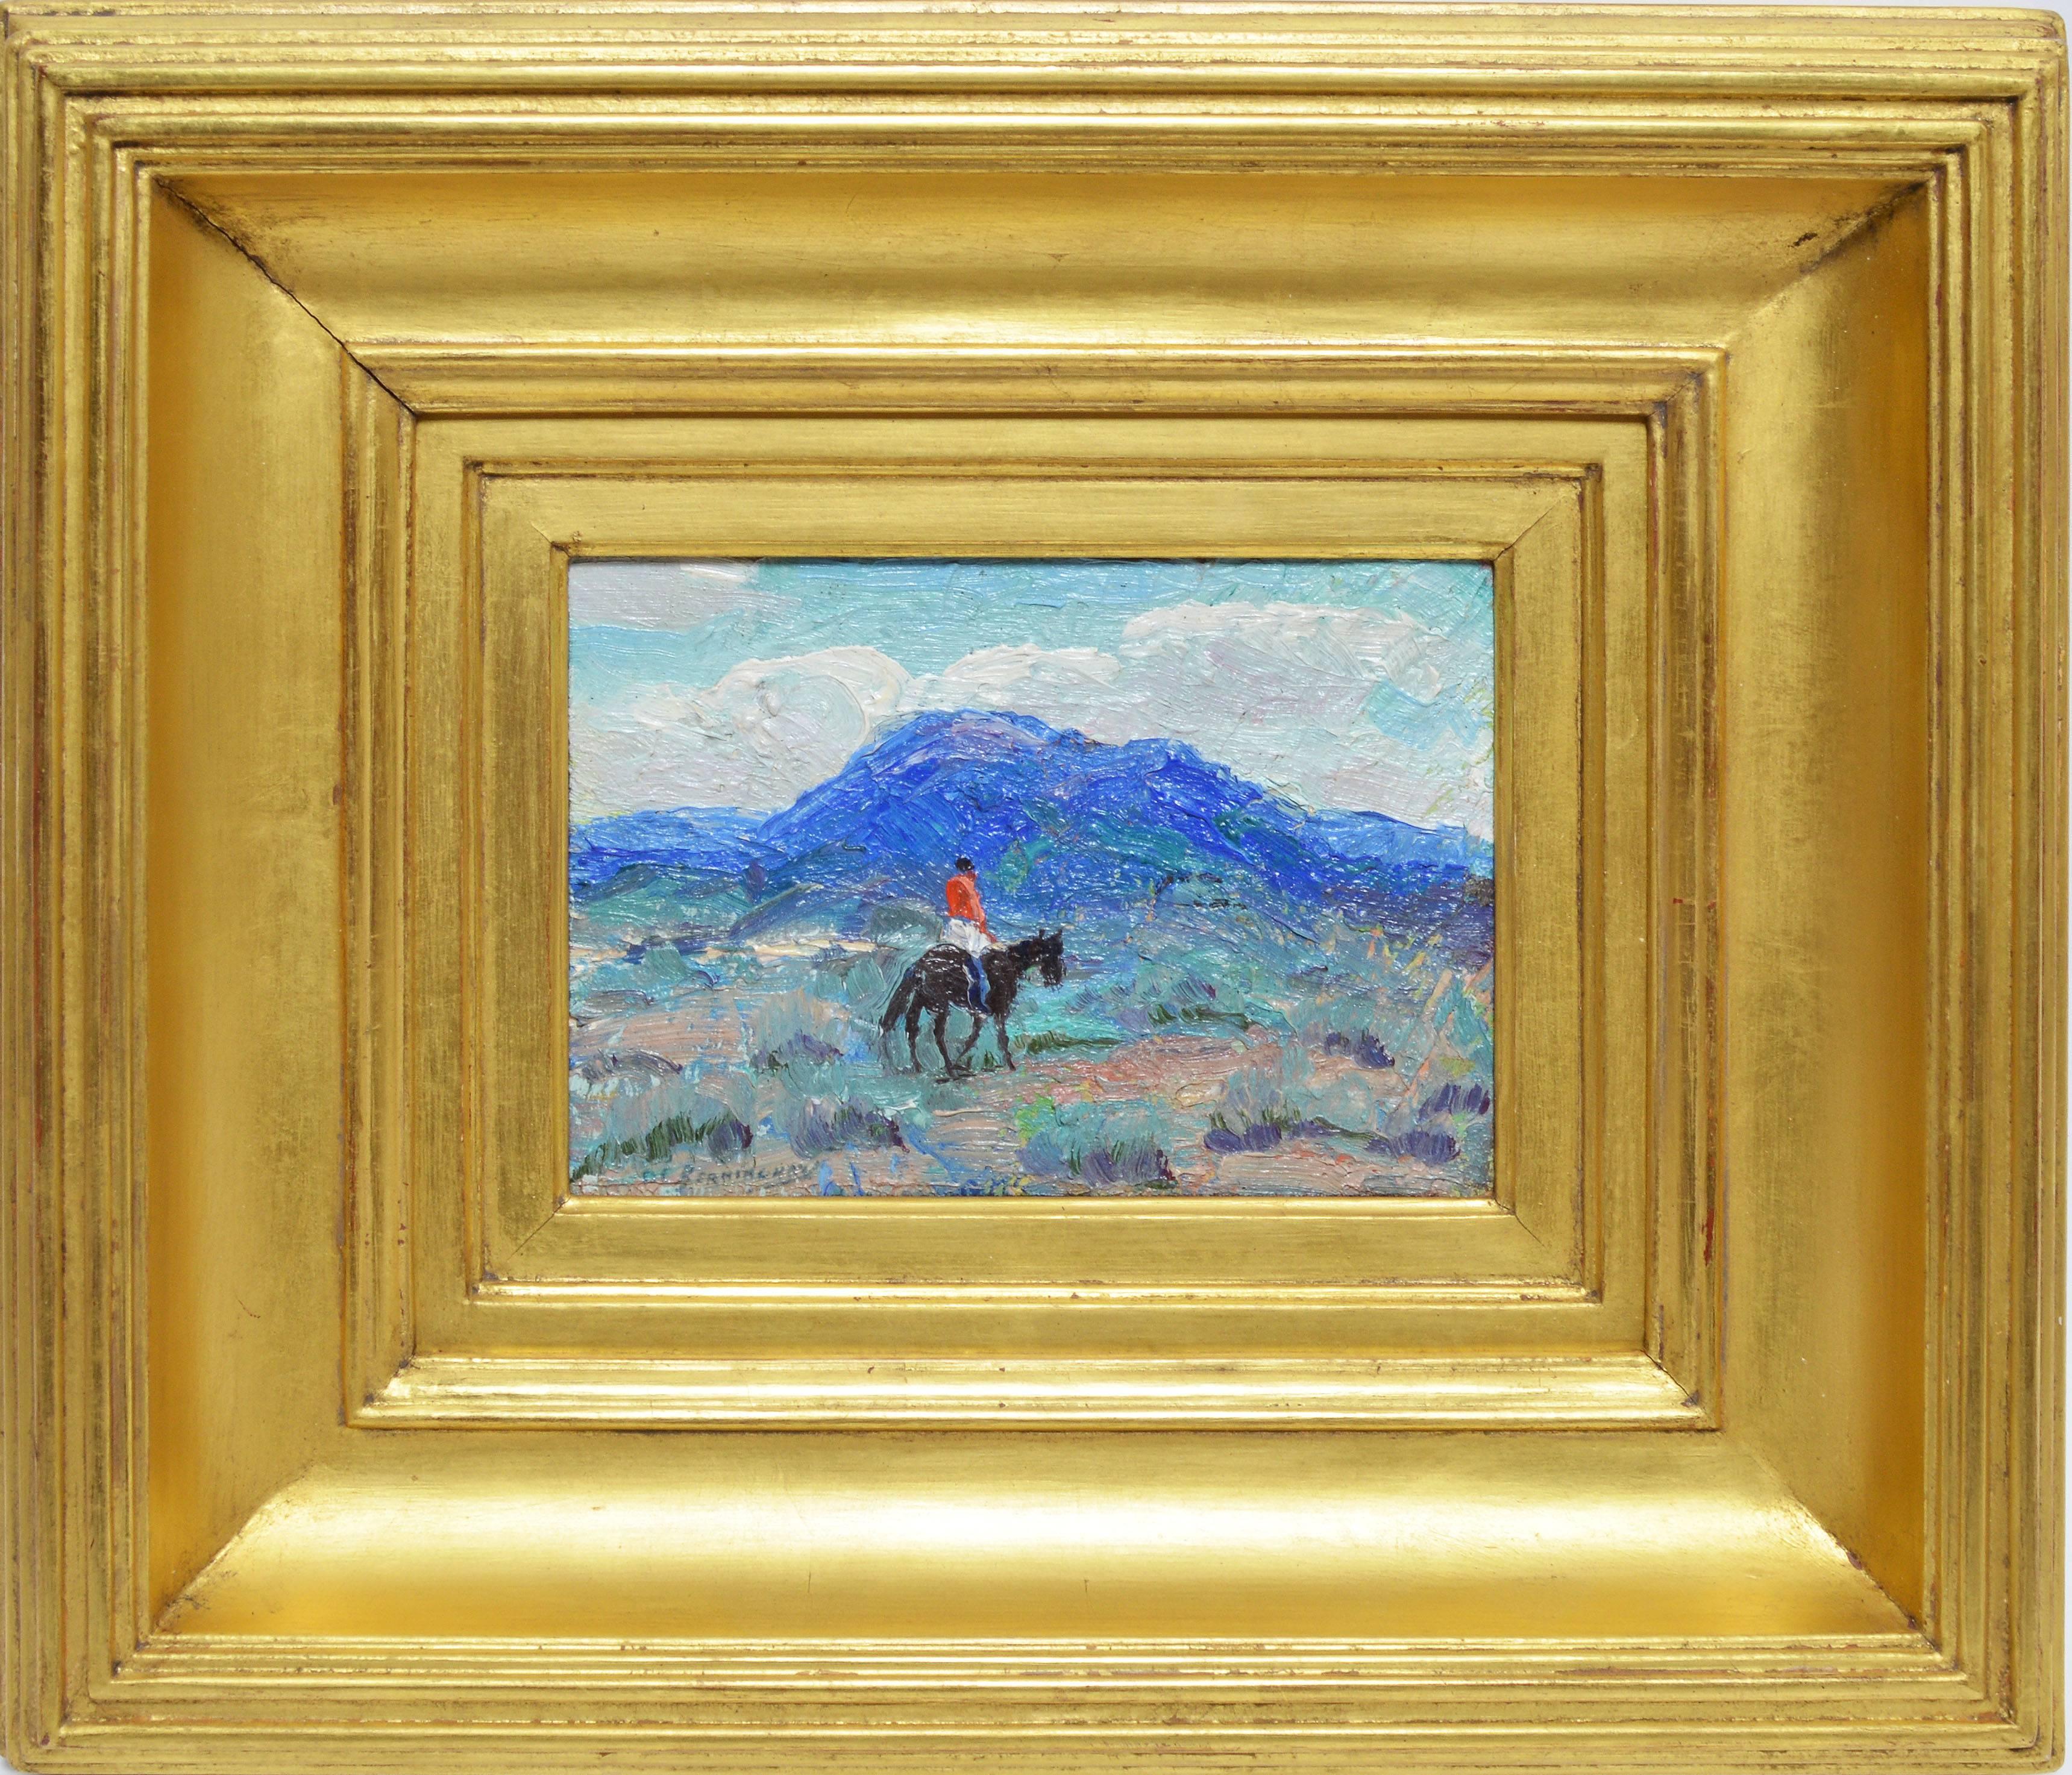 Impressionist landscape with a Native American on horseback by Oscar Edmund Berninghaus (1874 - 1952).   Oil on board, circa 1920. Displayed in a giltwood frame.  Image size, 5"L x 3.75"H, overall 11"L x 9"H.